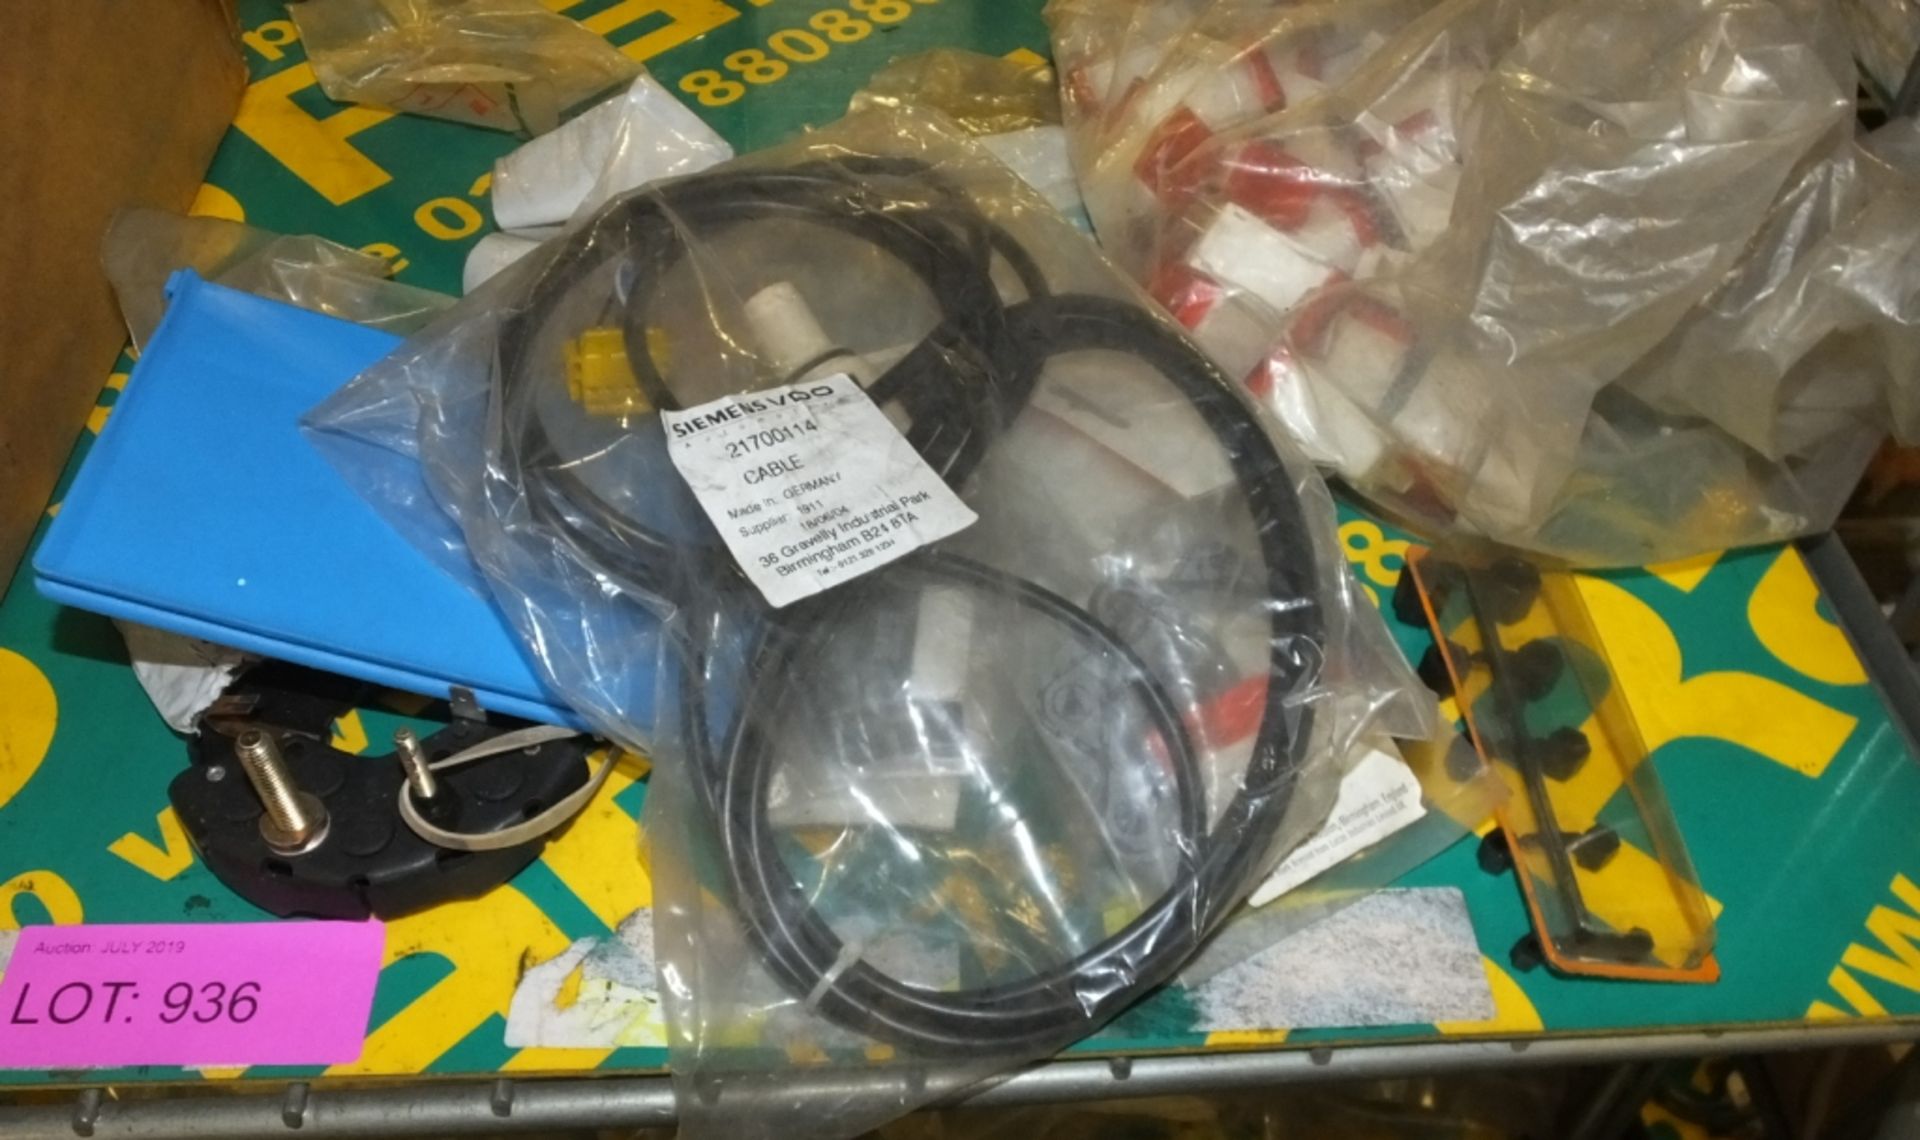 Box of Small Vehicle Parts inc Switches & Connectors, - Image 17 of 21